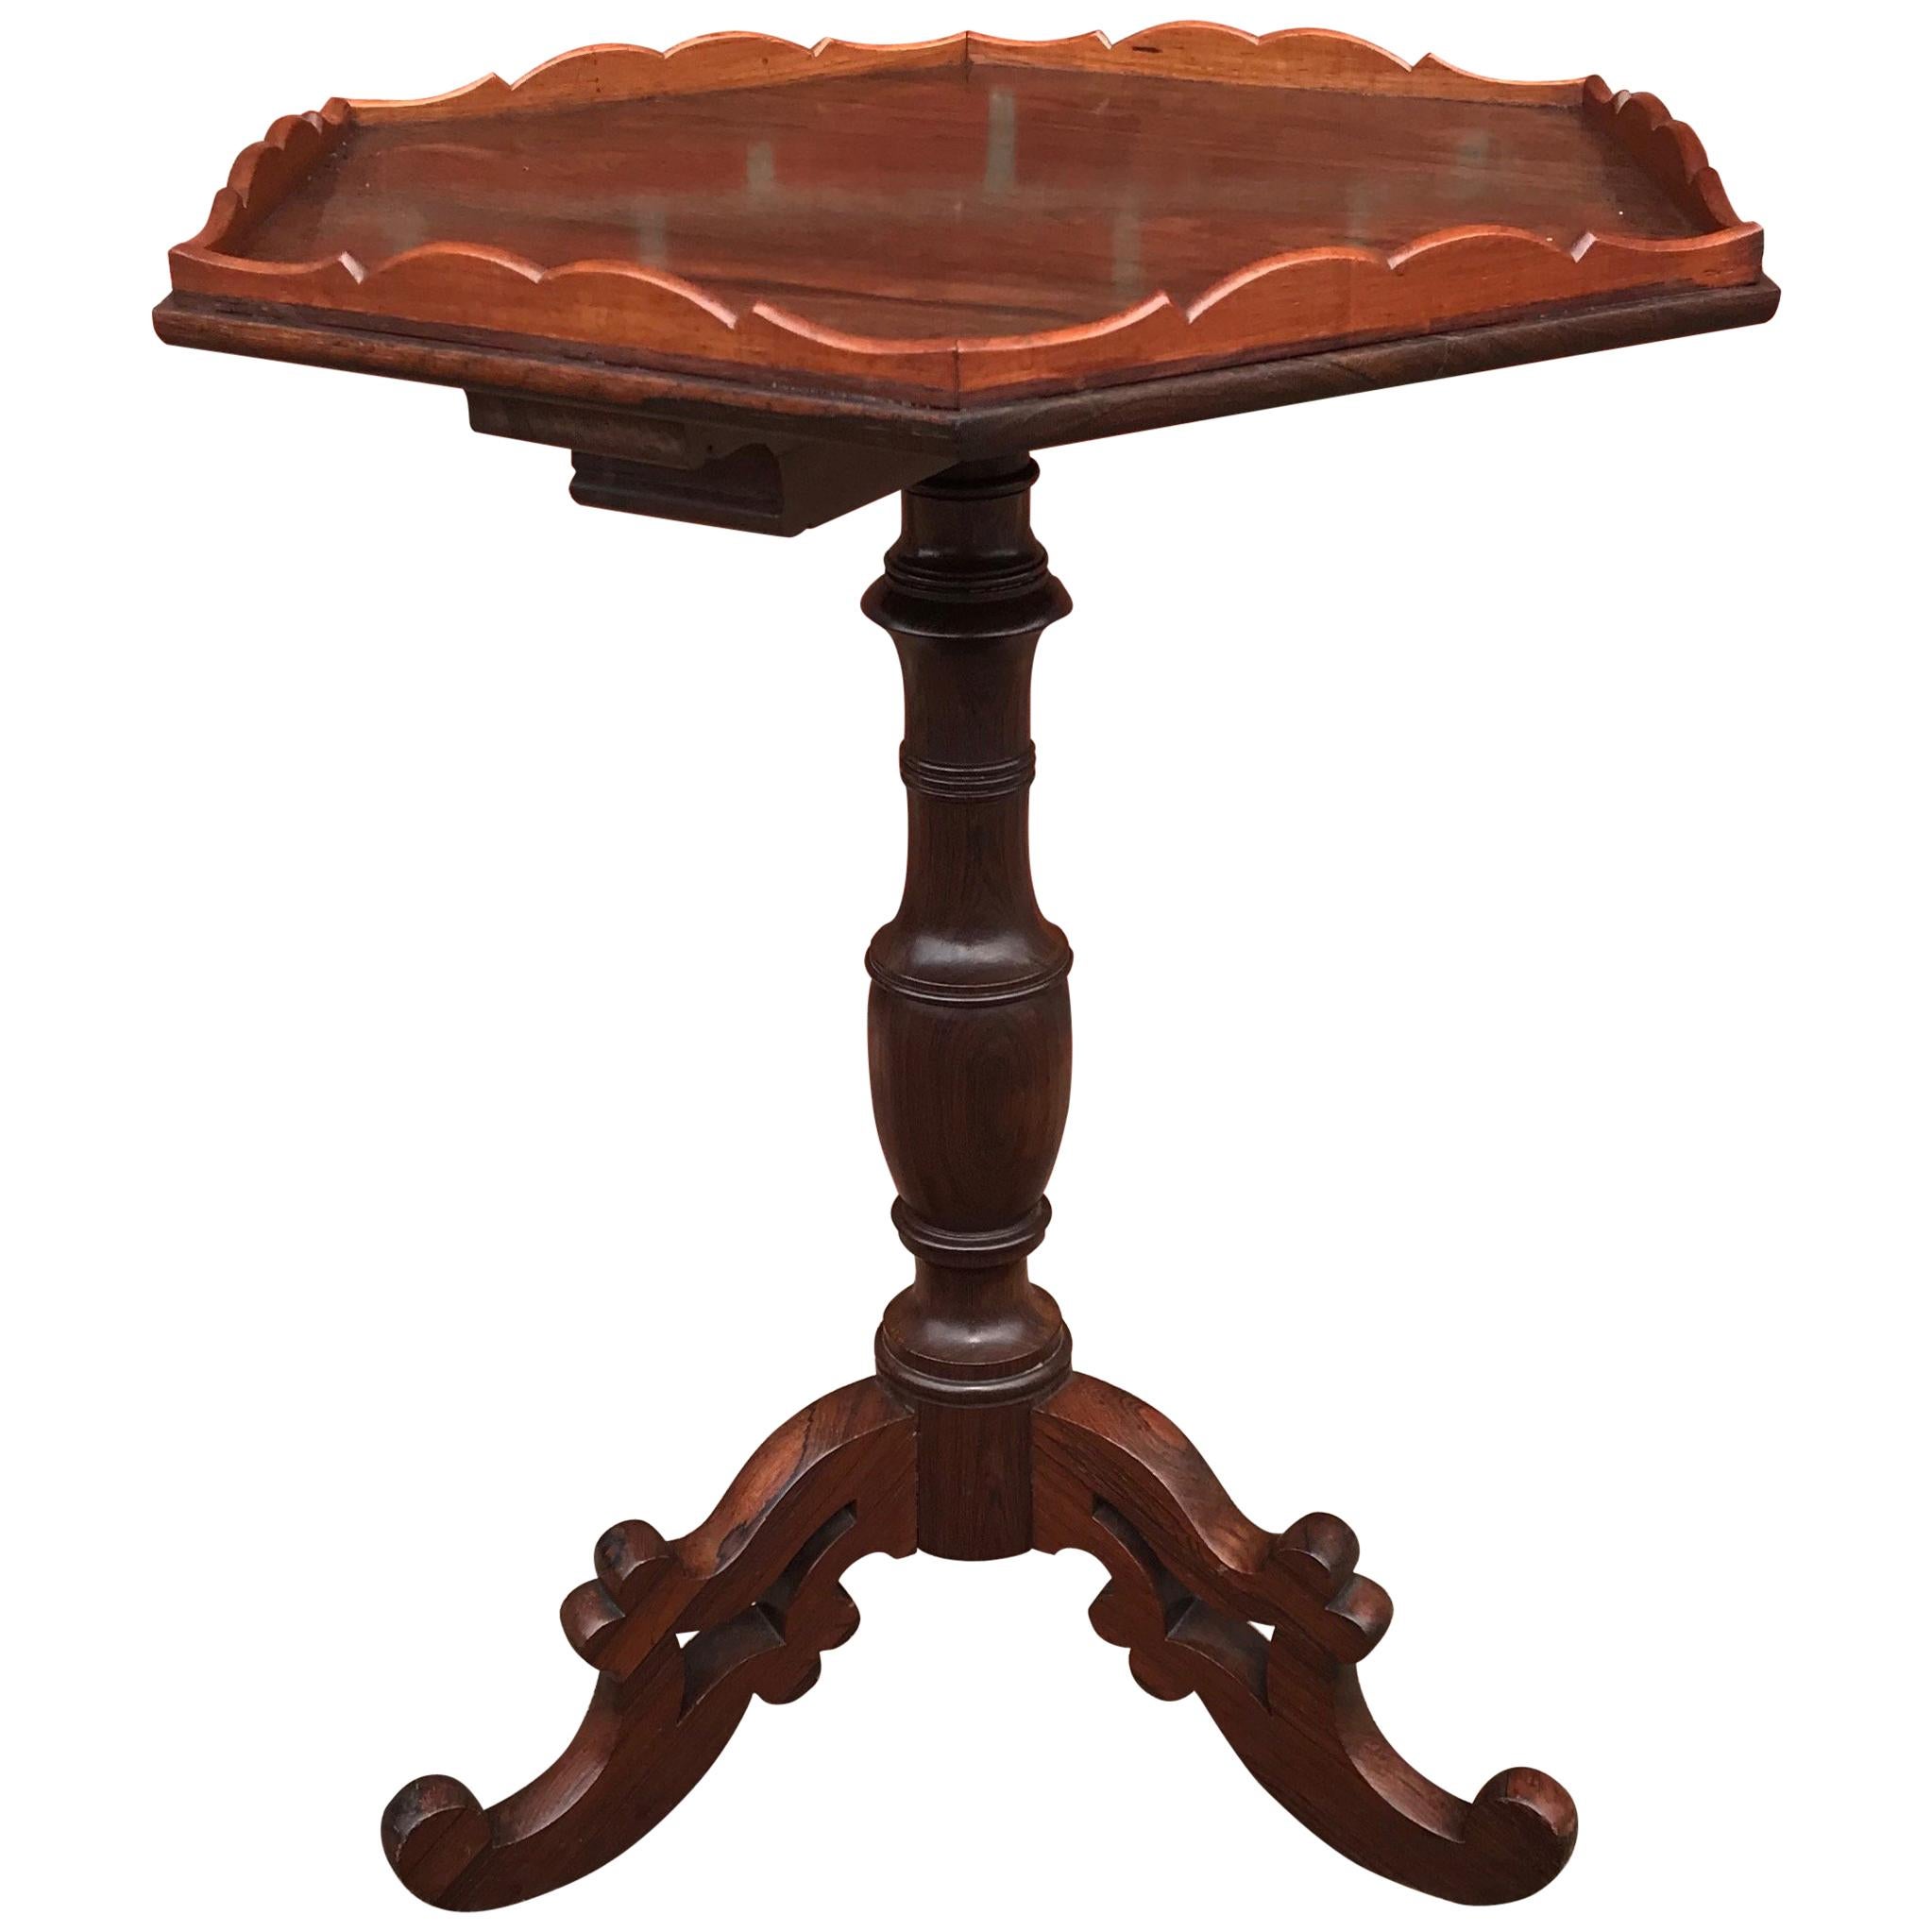 Amazing & Stylish Wine Table or End Table with Hexagonal Top on Tripod  Base